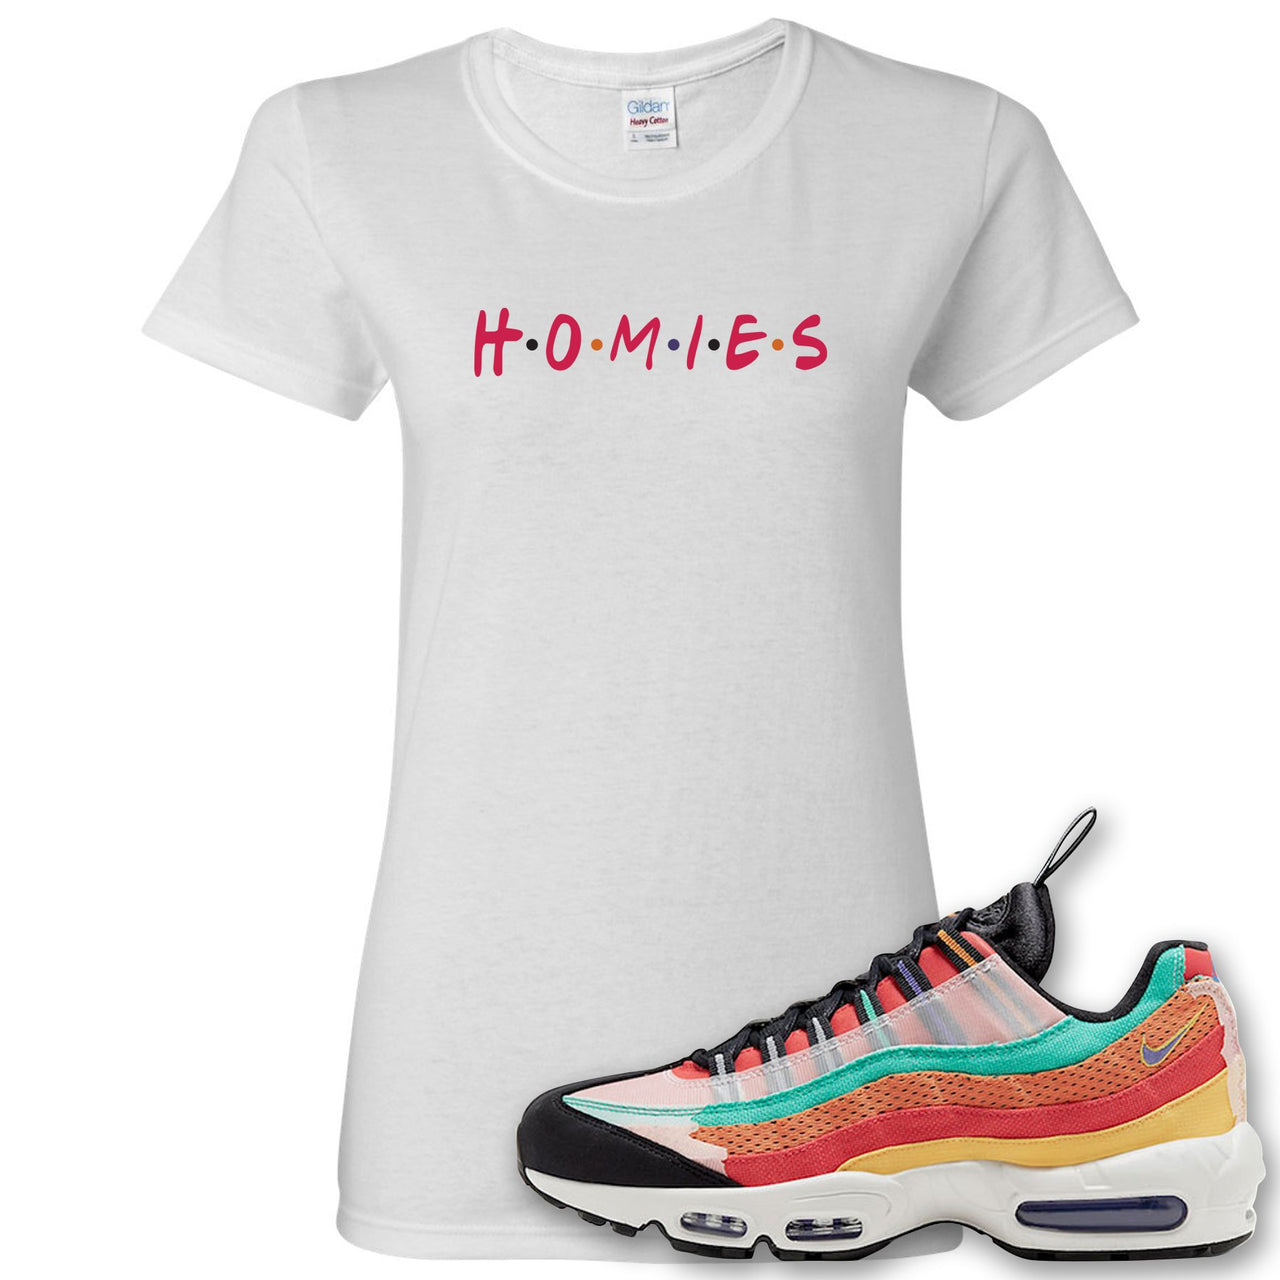 Air Max 95 Black History Month Sneaker White Women's T Shirt | Women's Tees to match Nike Air Max 95 Black History Month Shoes | Homies